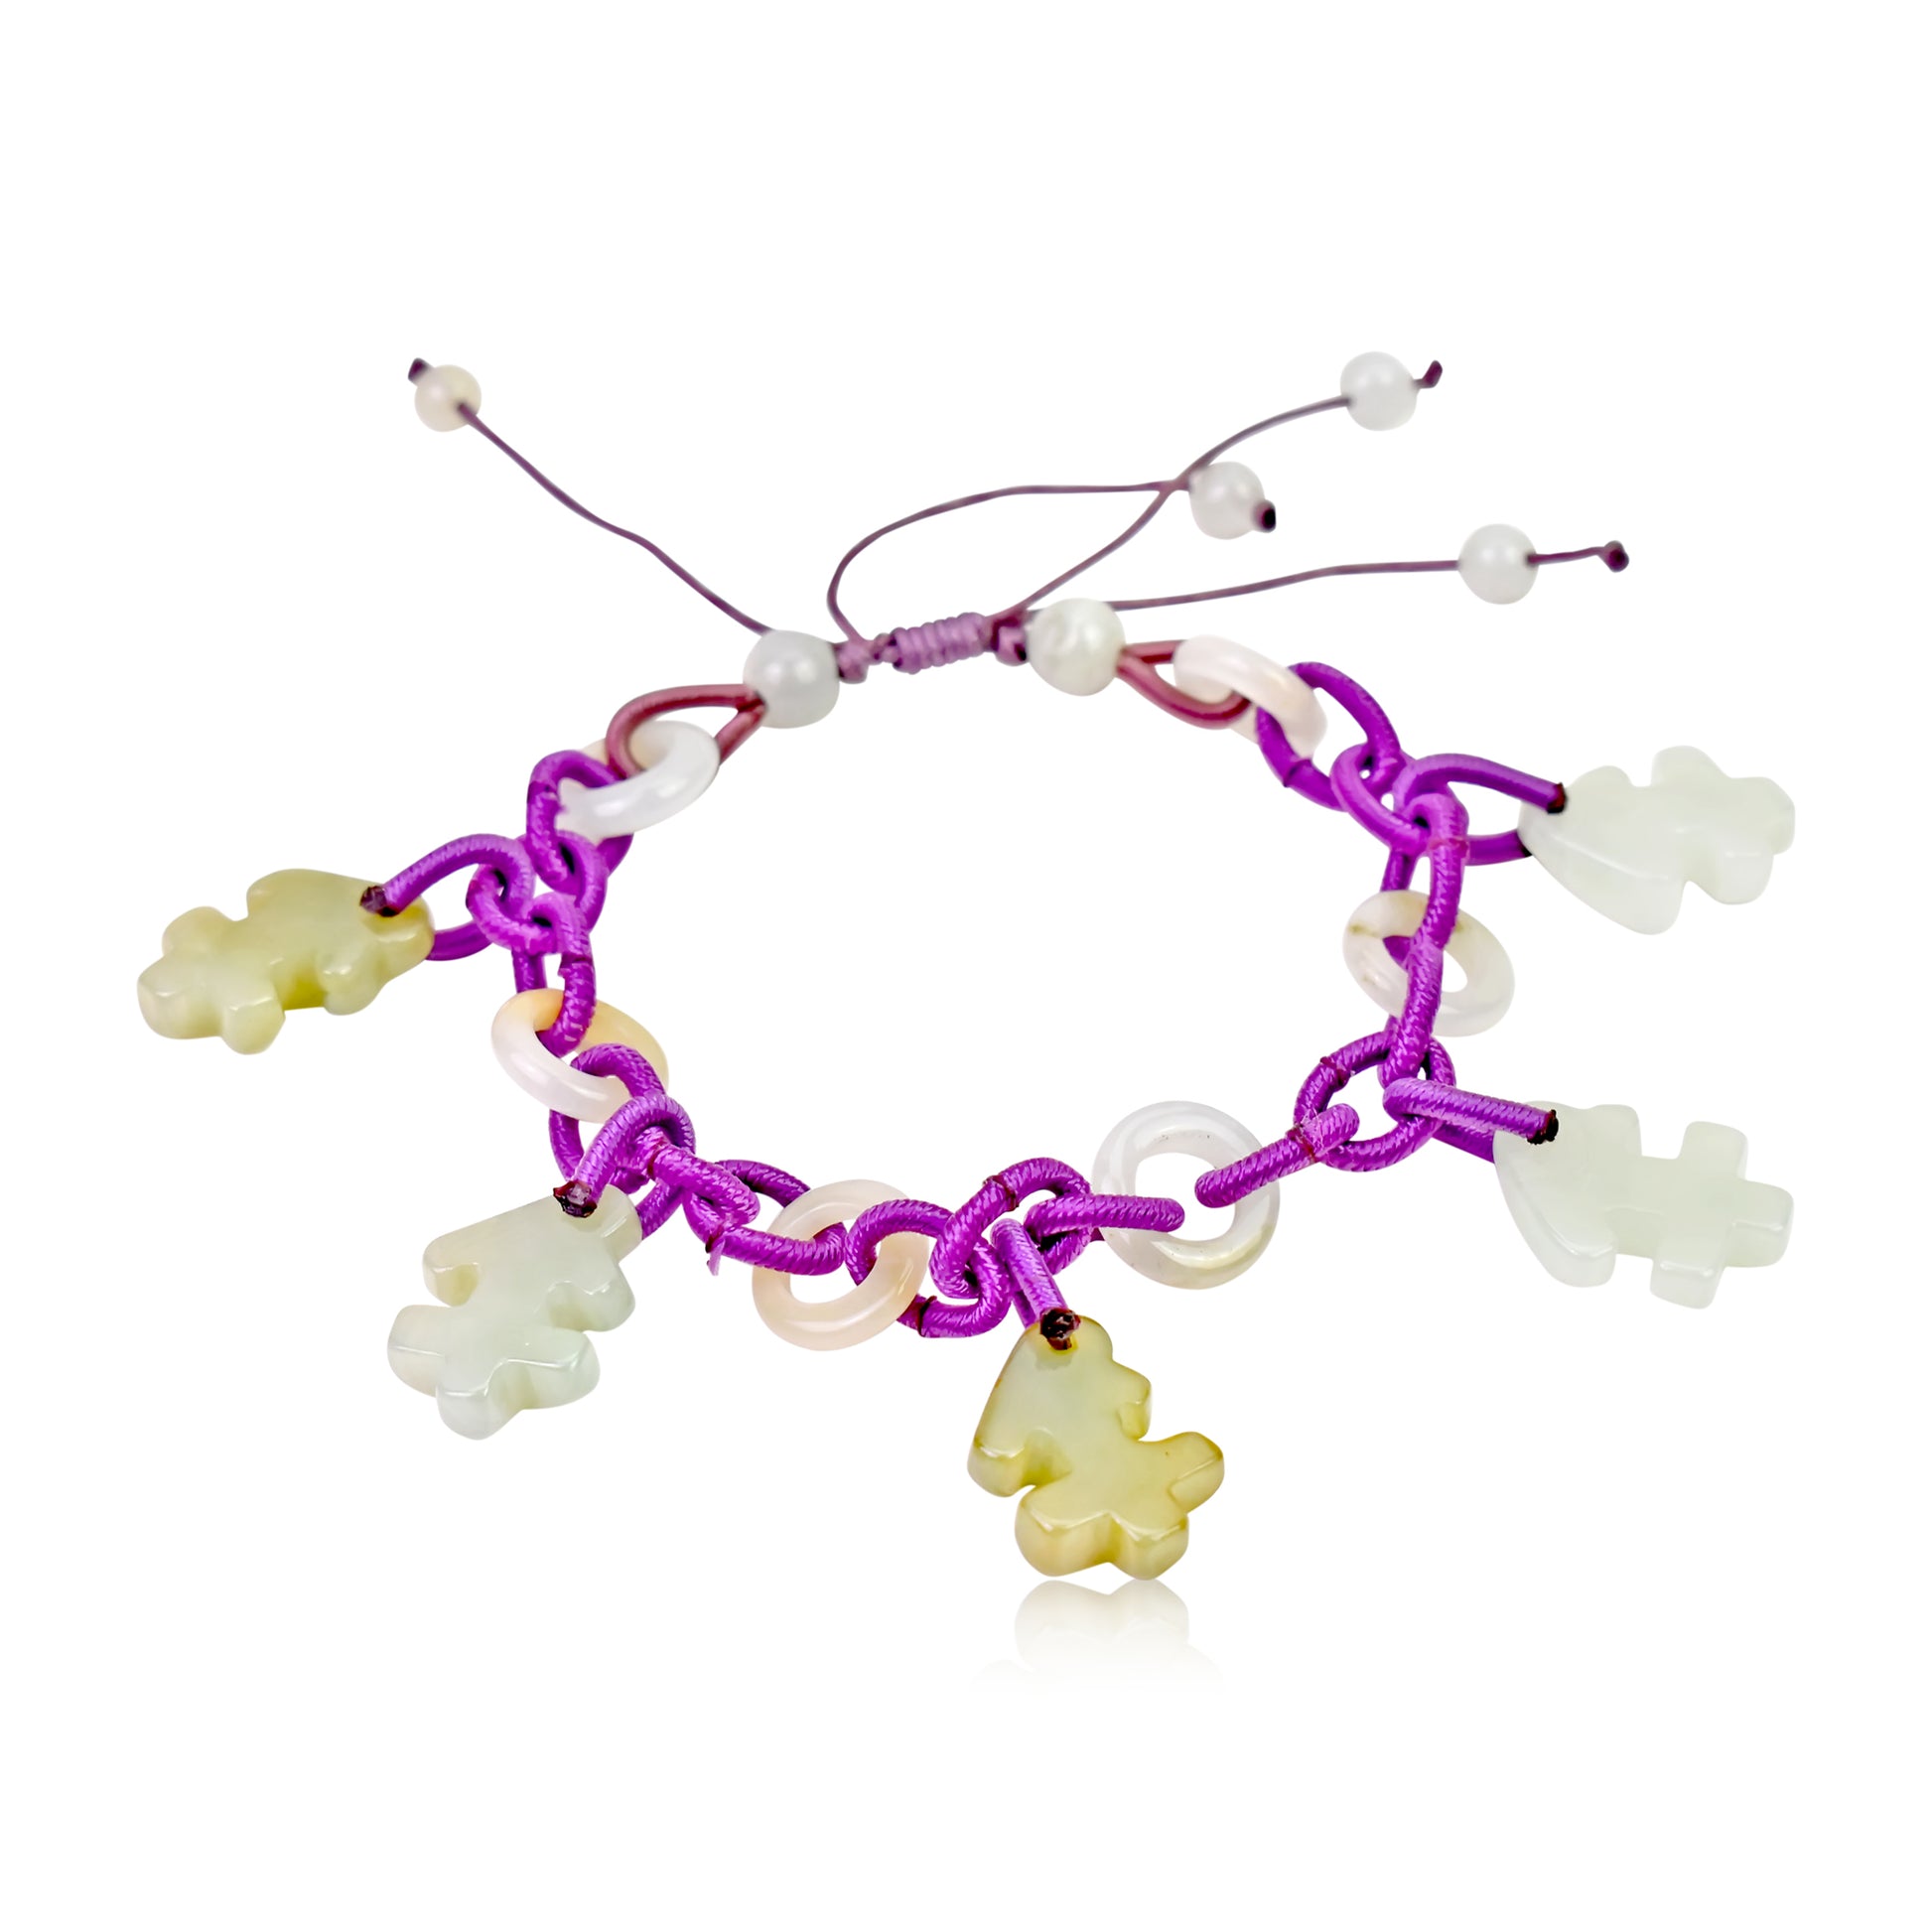 Celebrate your Zodiac Sign with Sagittarius Astrology Jade Bracelet made with Purple Cord